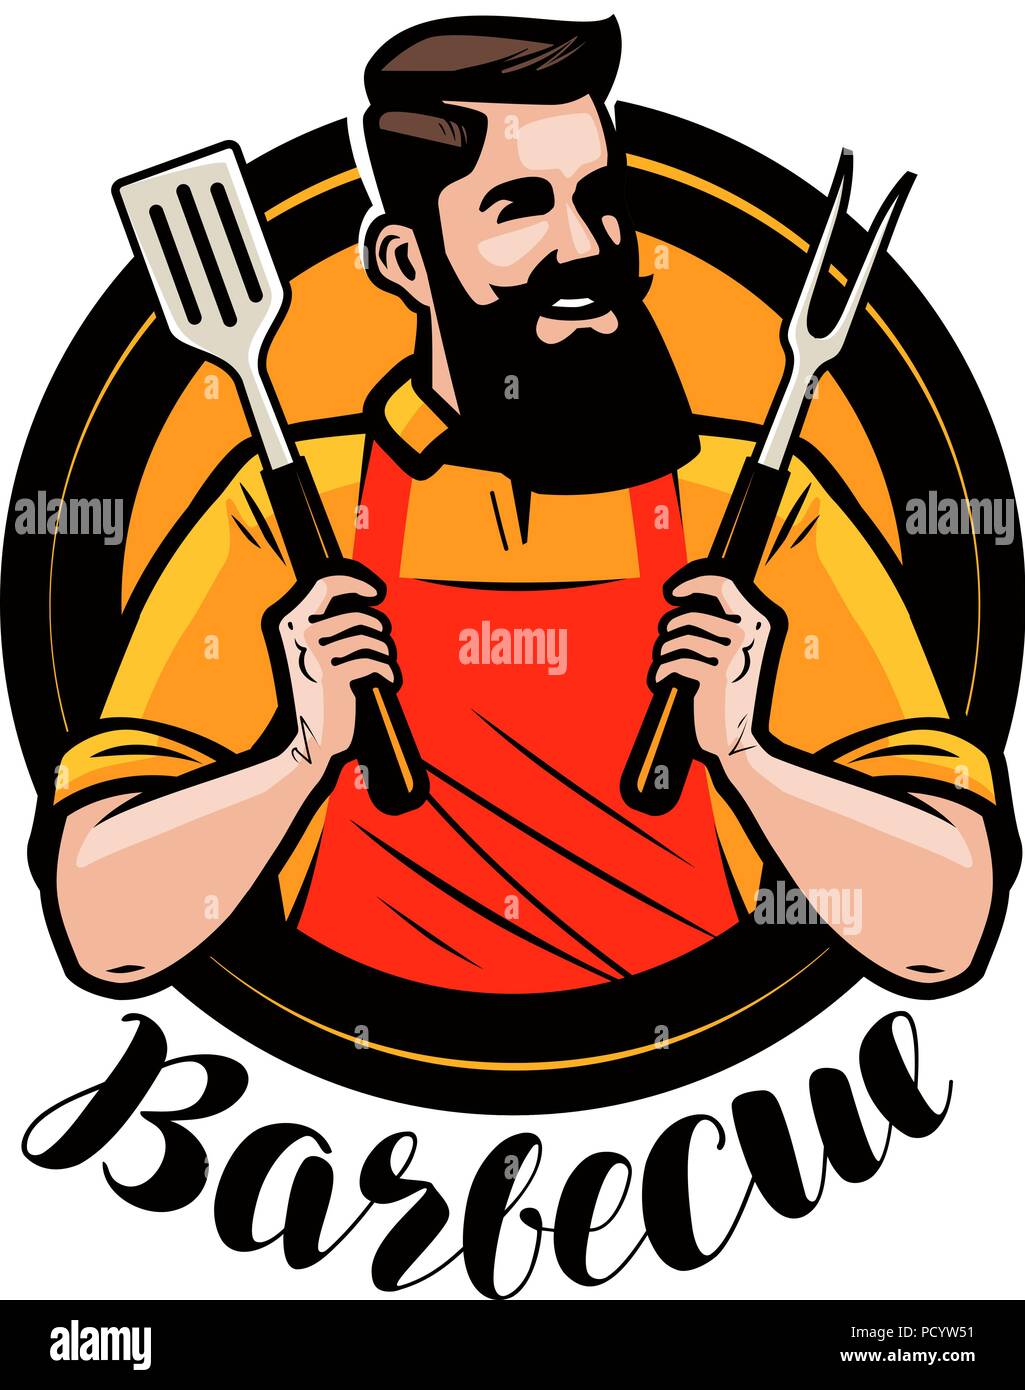 BBQ, barbecue logo or label. Chef or happy cook holding a grill tools